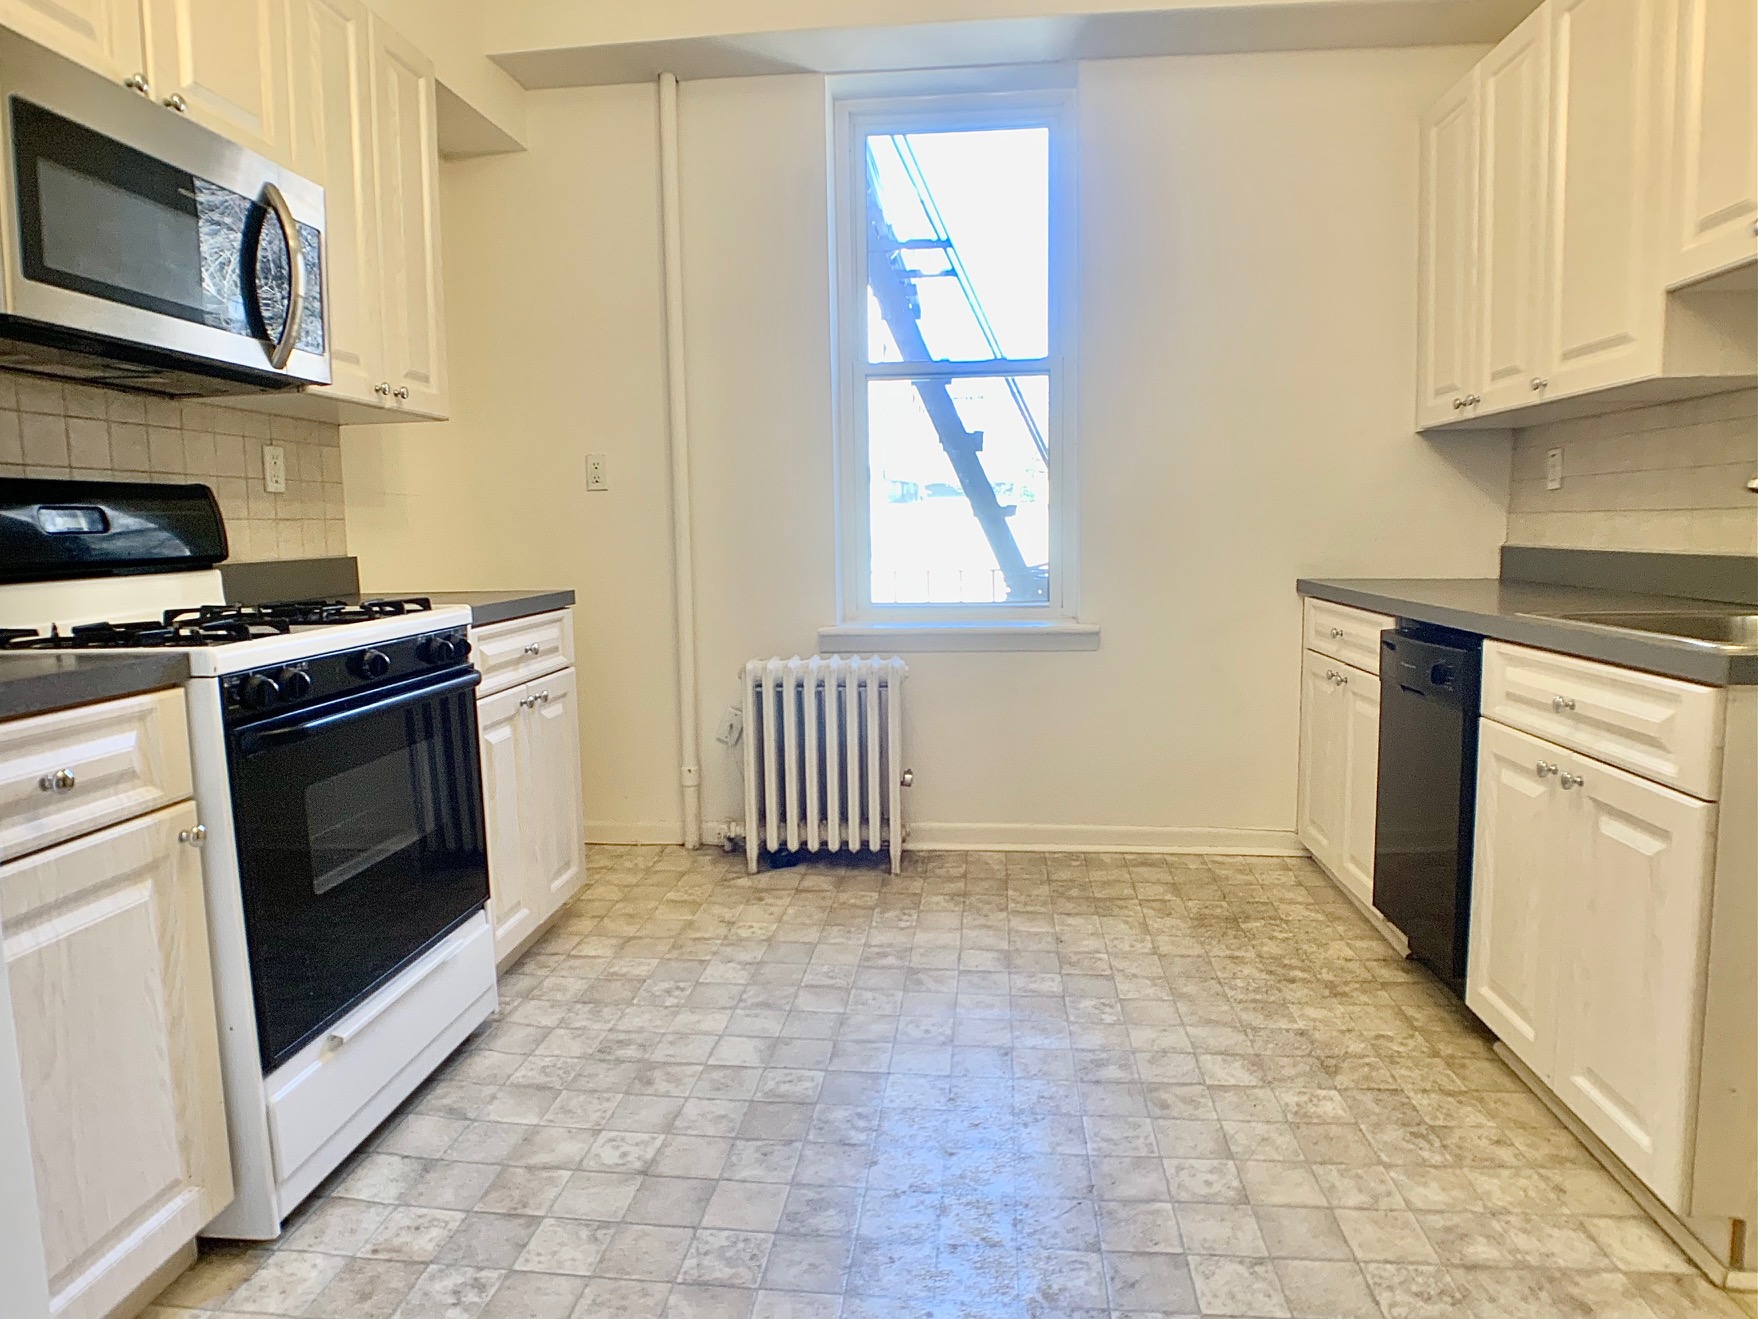 AVAIL 7/1 - One bed one bath apartment - Hardwood floors, heat and hot water included, washer and dryer in the building. Amazing location near NYC transportation, bus, train, path, Washington St, dining, shops, entertainment, night life, and more! 